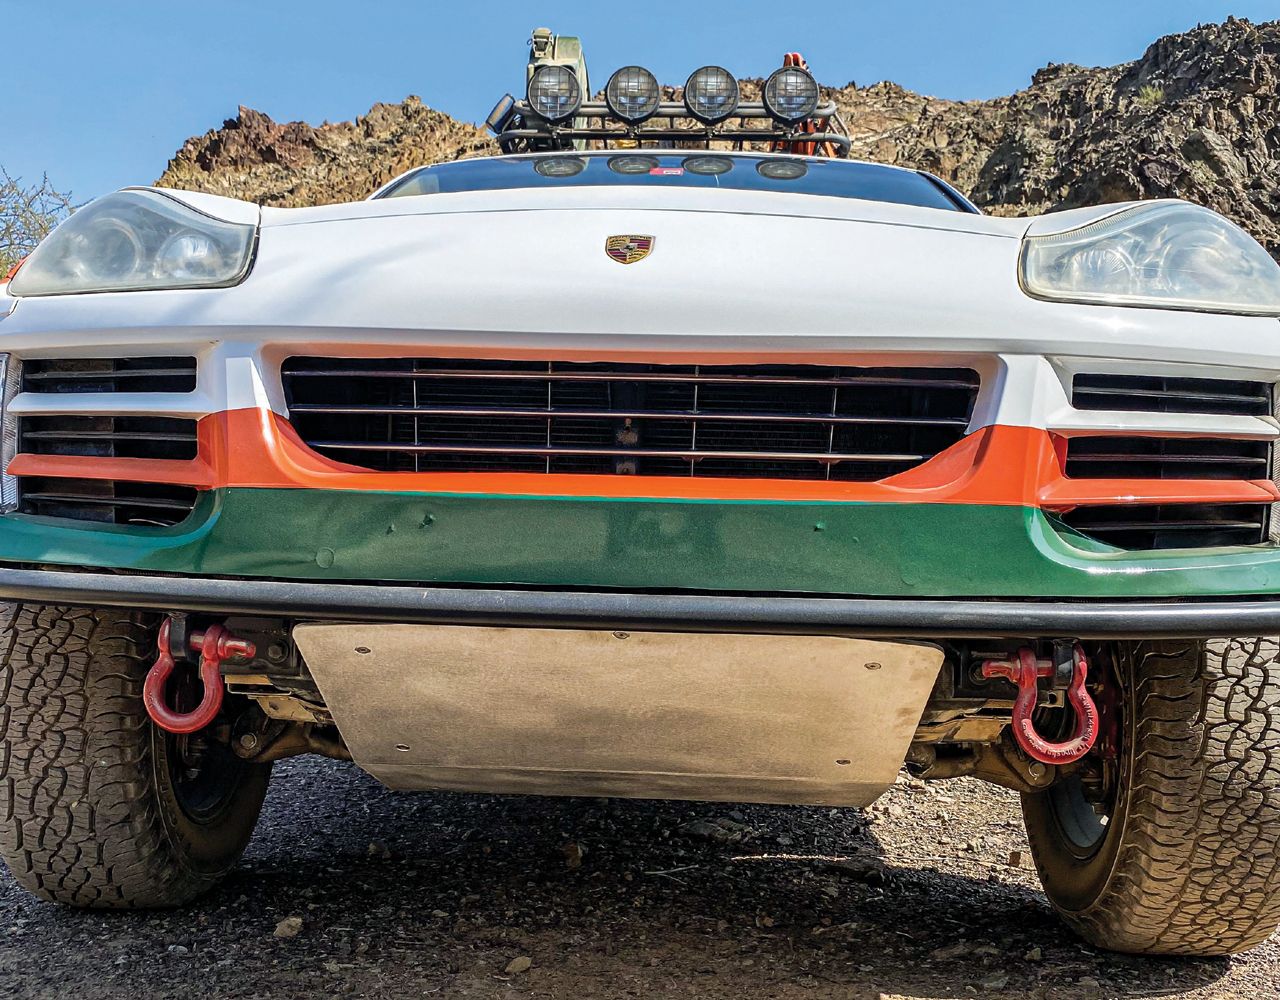 We go dune bashing in a Porsche Cayenne Coupe - autoX